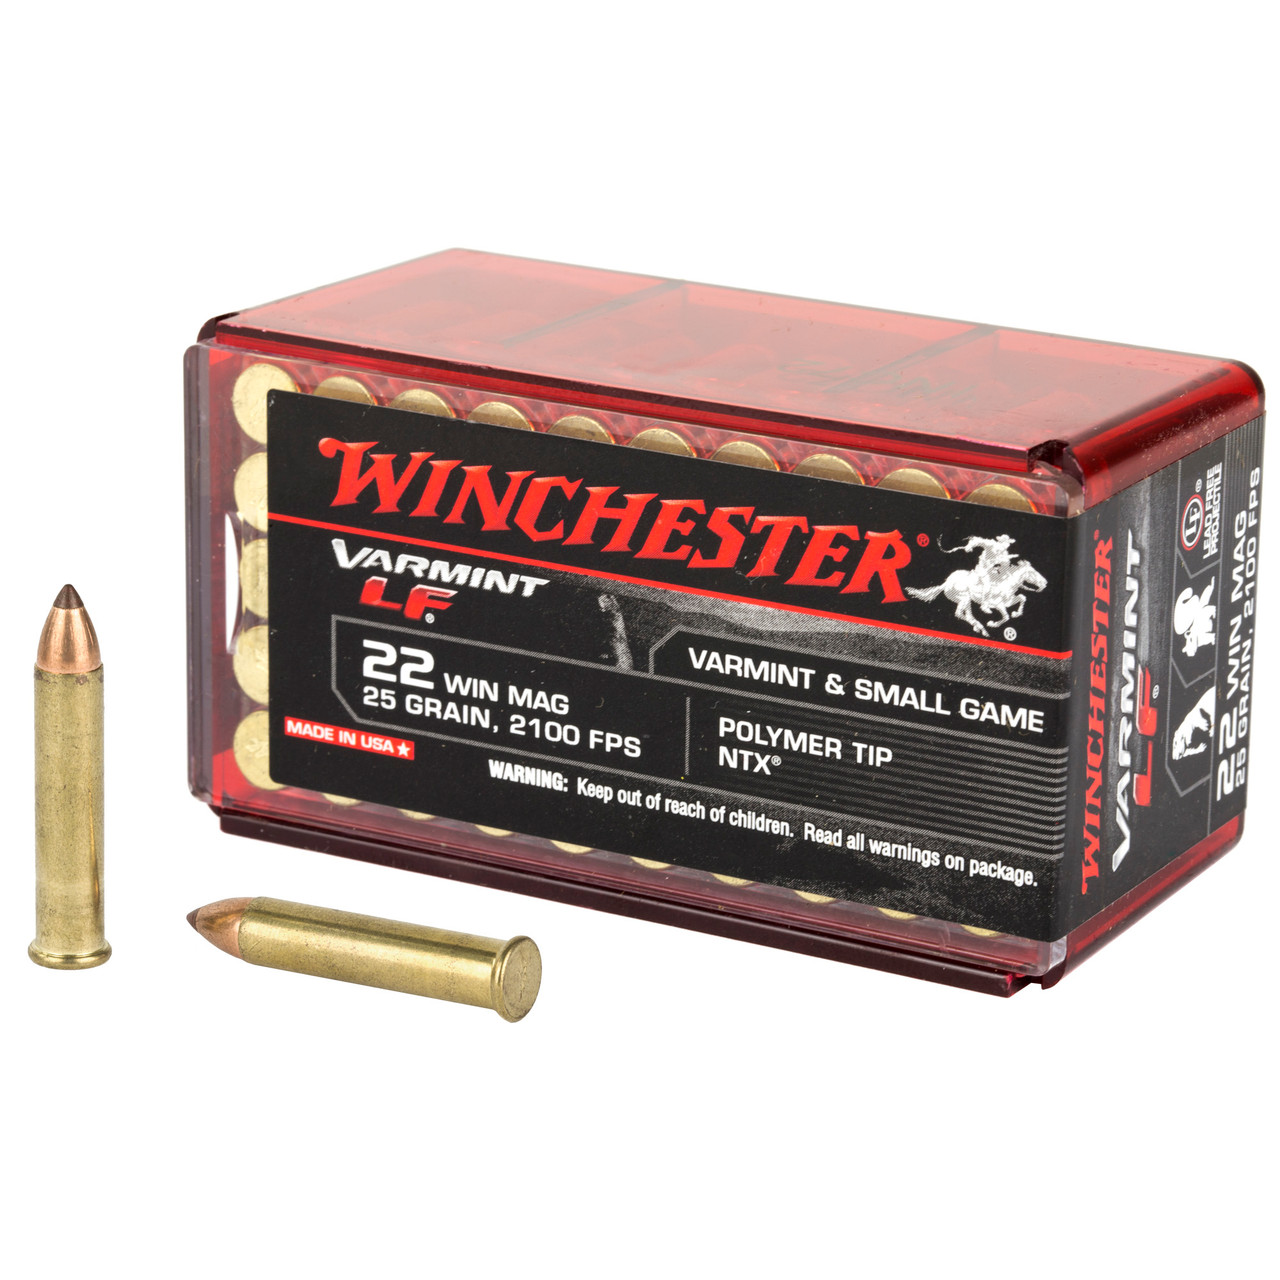 Winchester Polymer-Tip NTX Lead Free Ammo